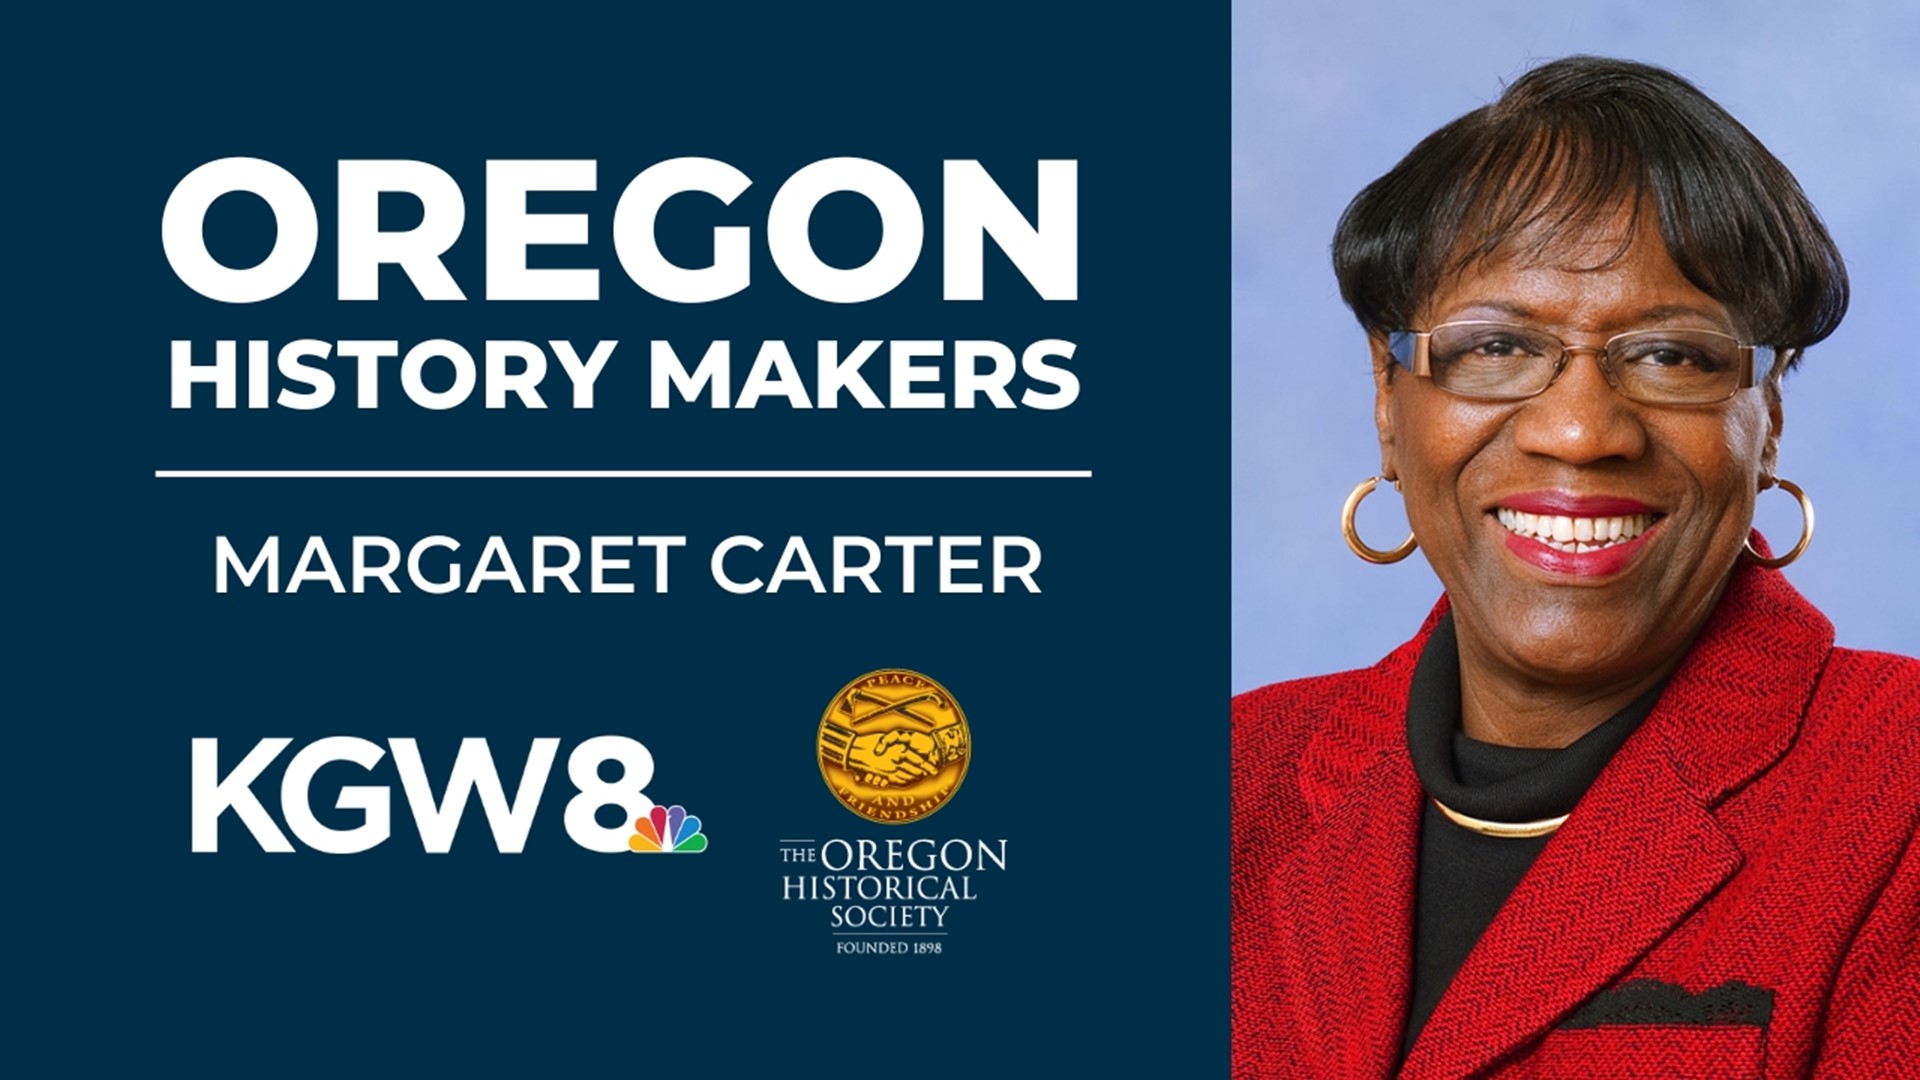 Margaret Carter has been named as one of 10 Oregon "Women of the Century" by USA Today and Salem's Stateman Journal.